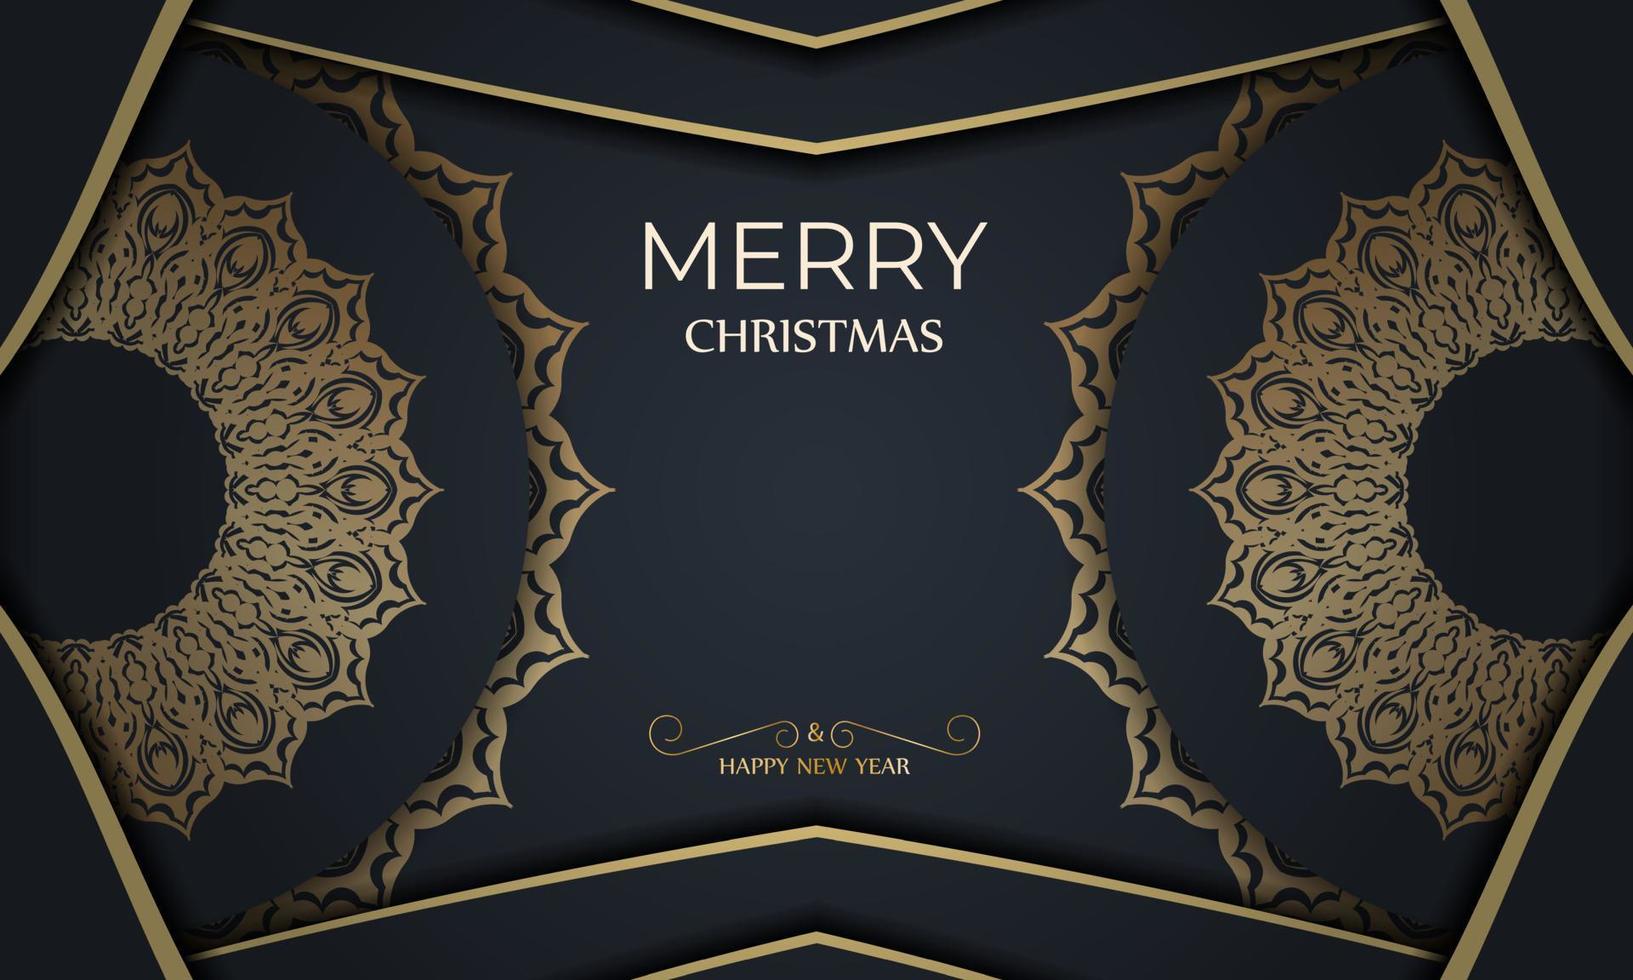 Merry Christmas and Happy New Year greeting brochure template in dark blue color with winter gold ornament vector